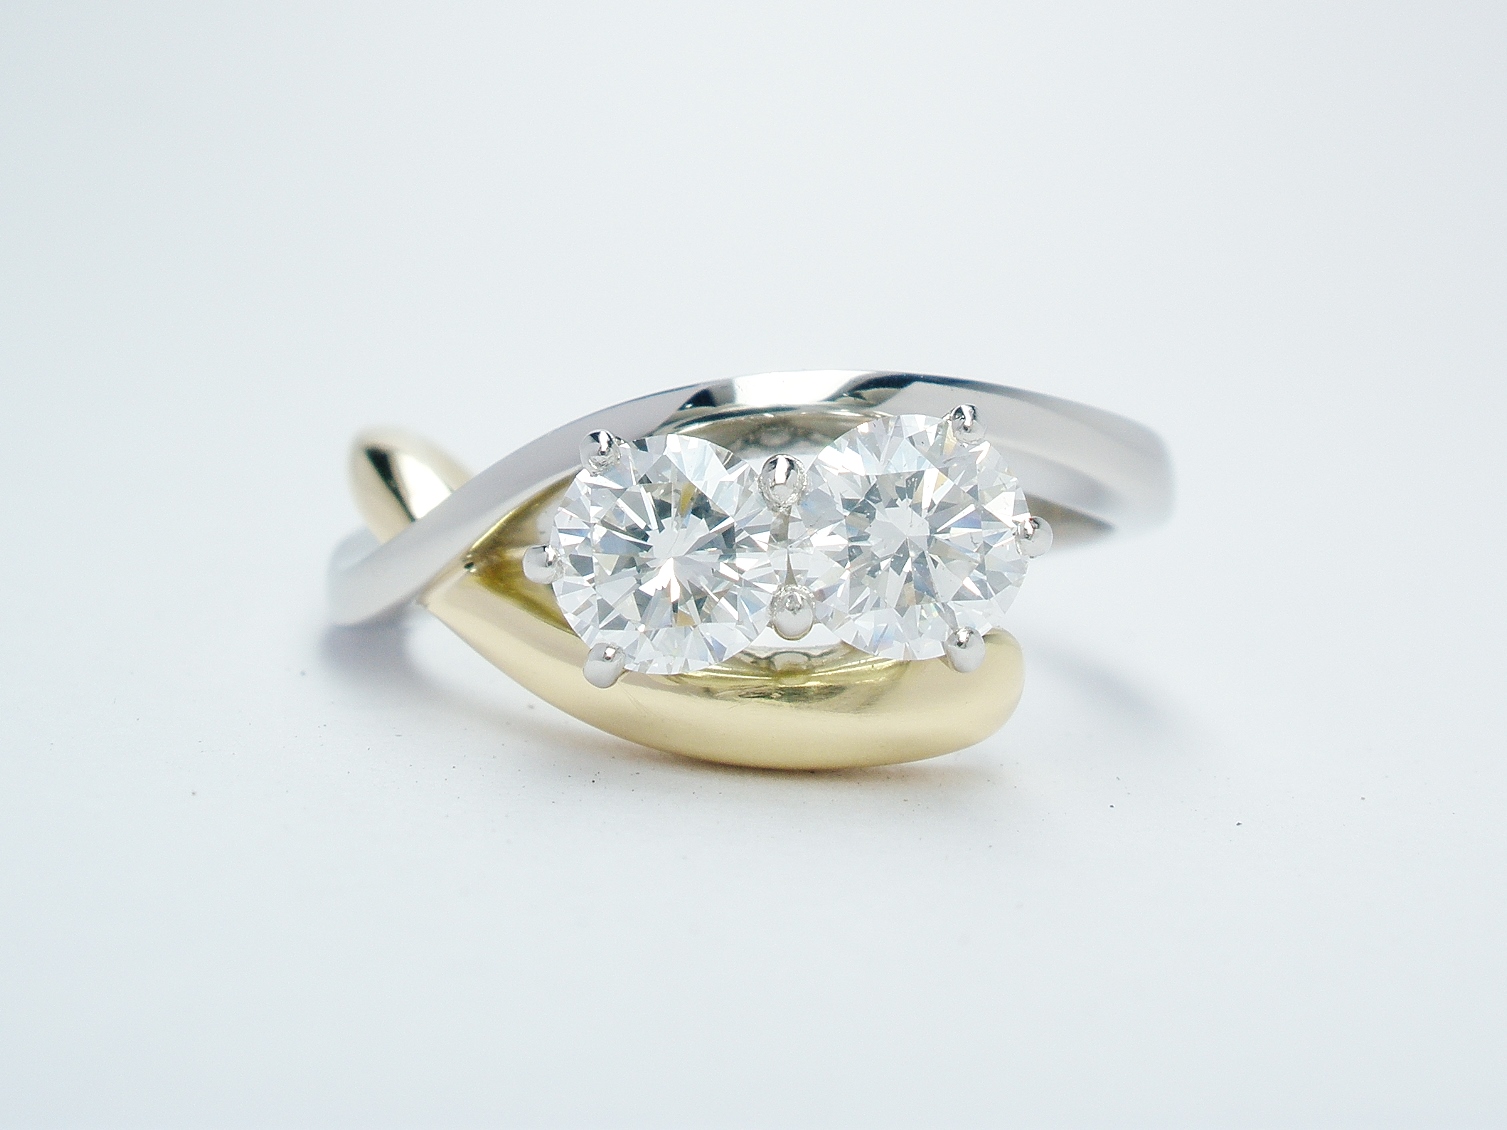 Platinum and 18ct. yellow gold open cross-over 2 stone round brilliant cut diamond ring. Ideal diamond sizes from 0.35cts. to 0.45cts.